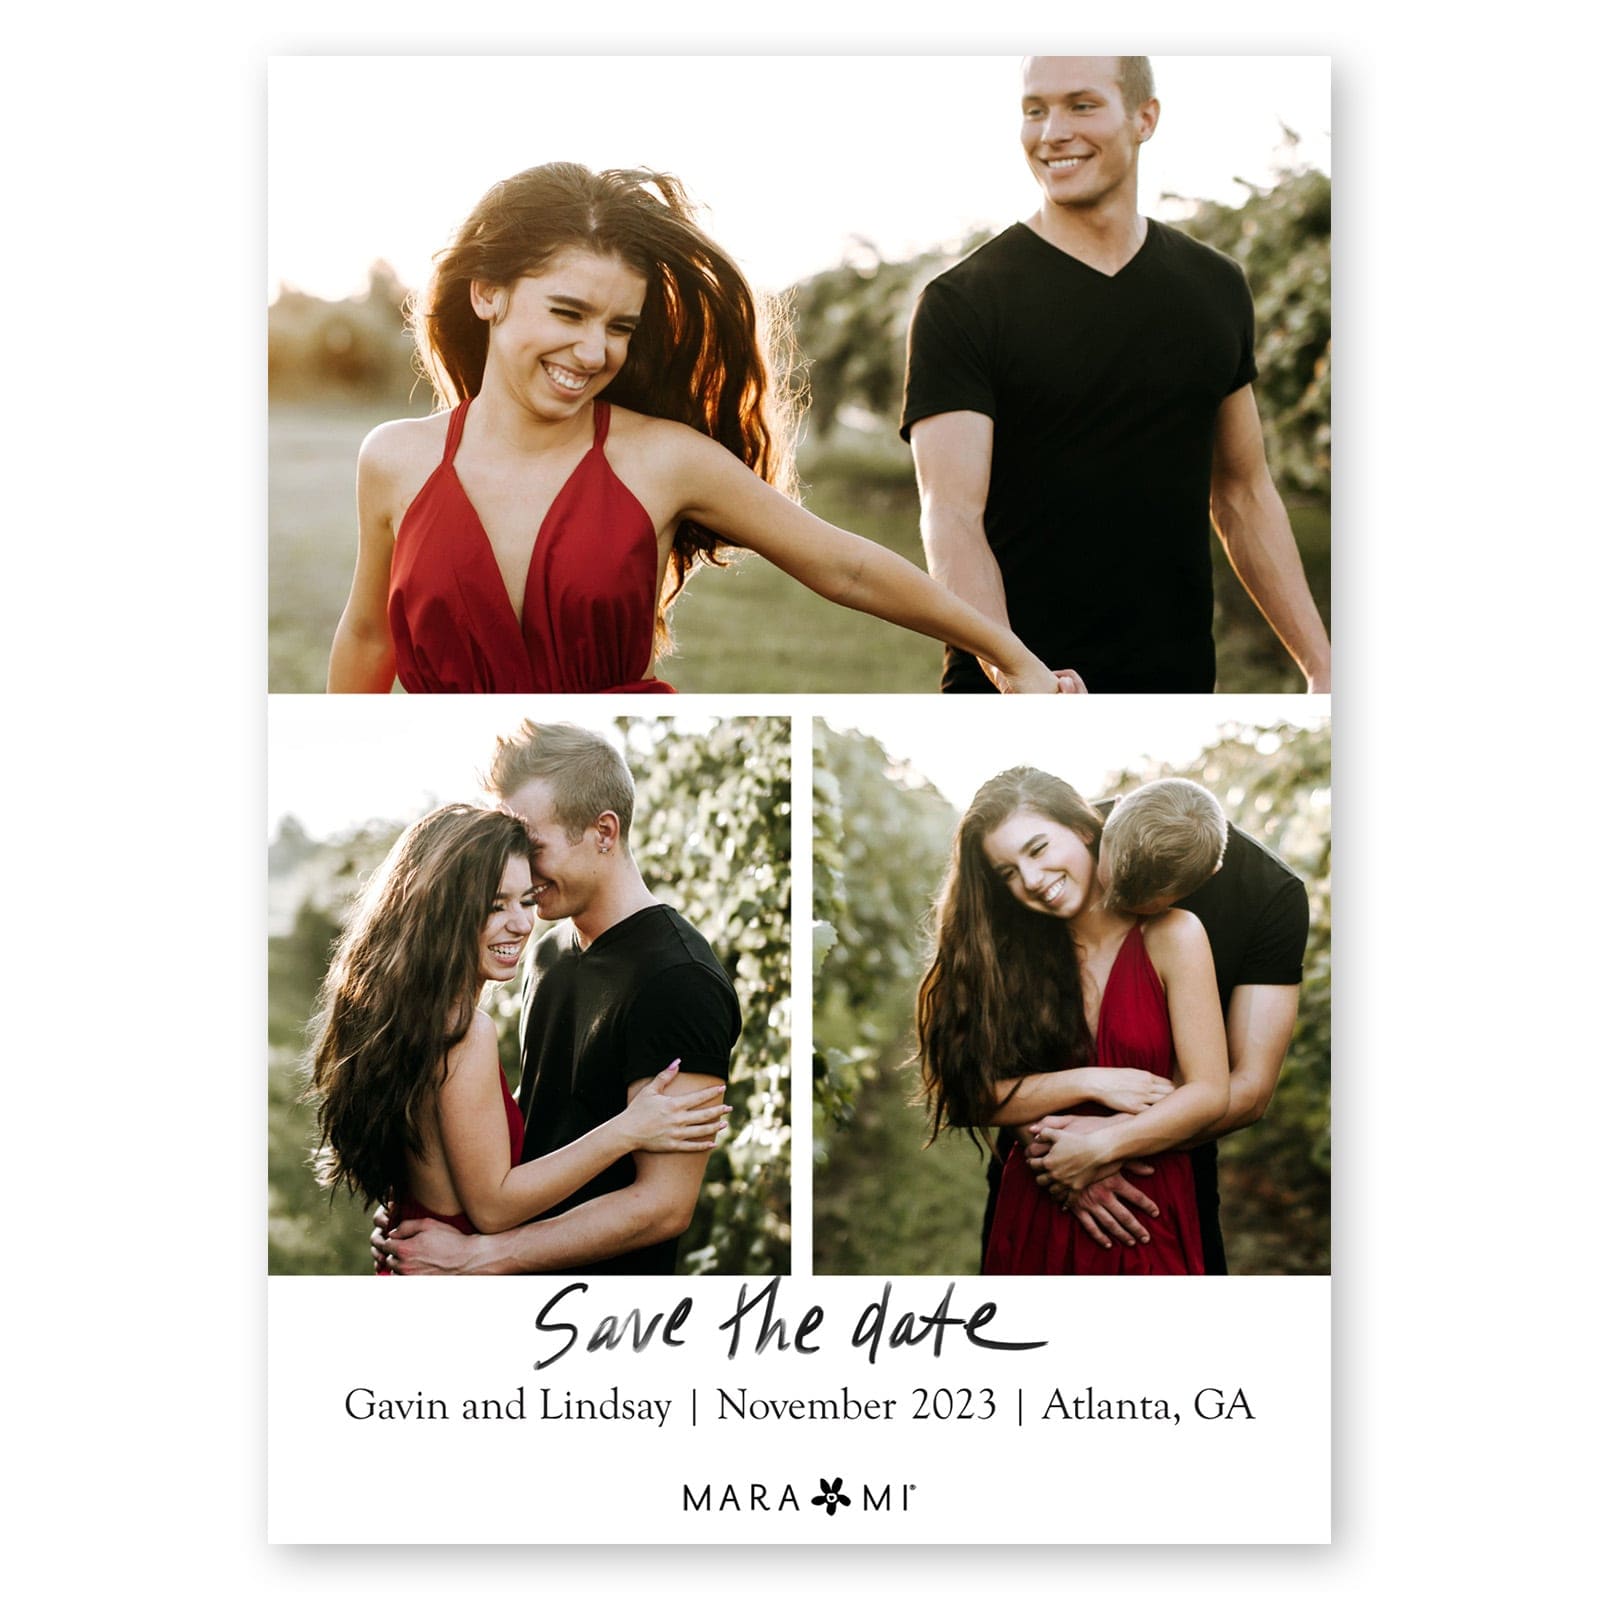 Share more than 138 save the date dress ideas super hot